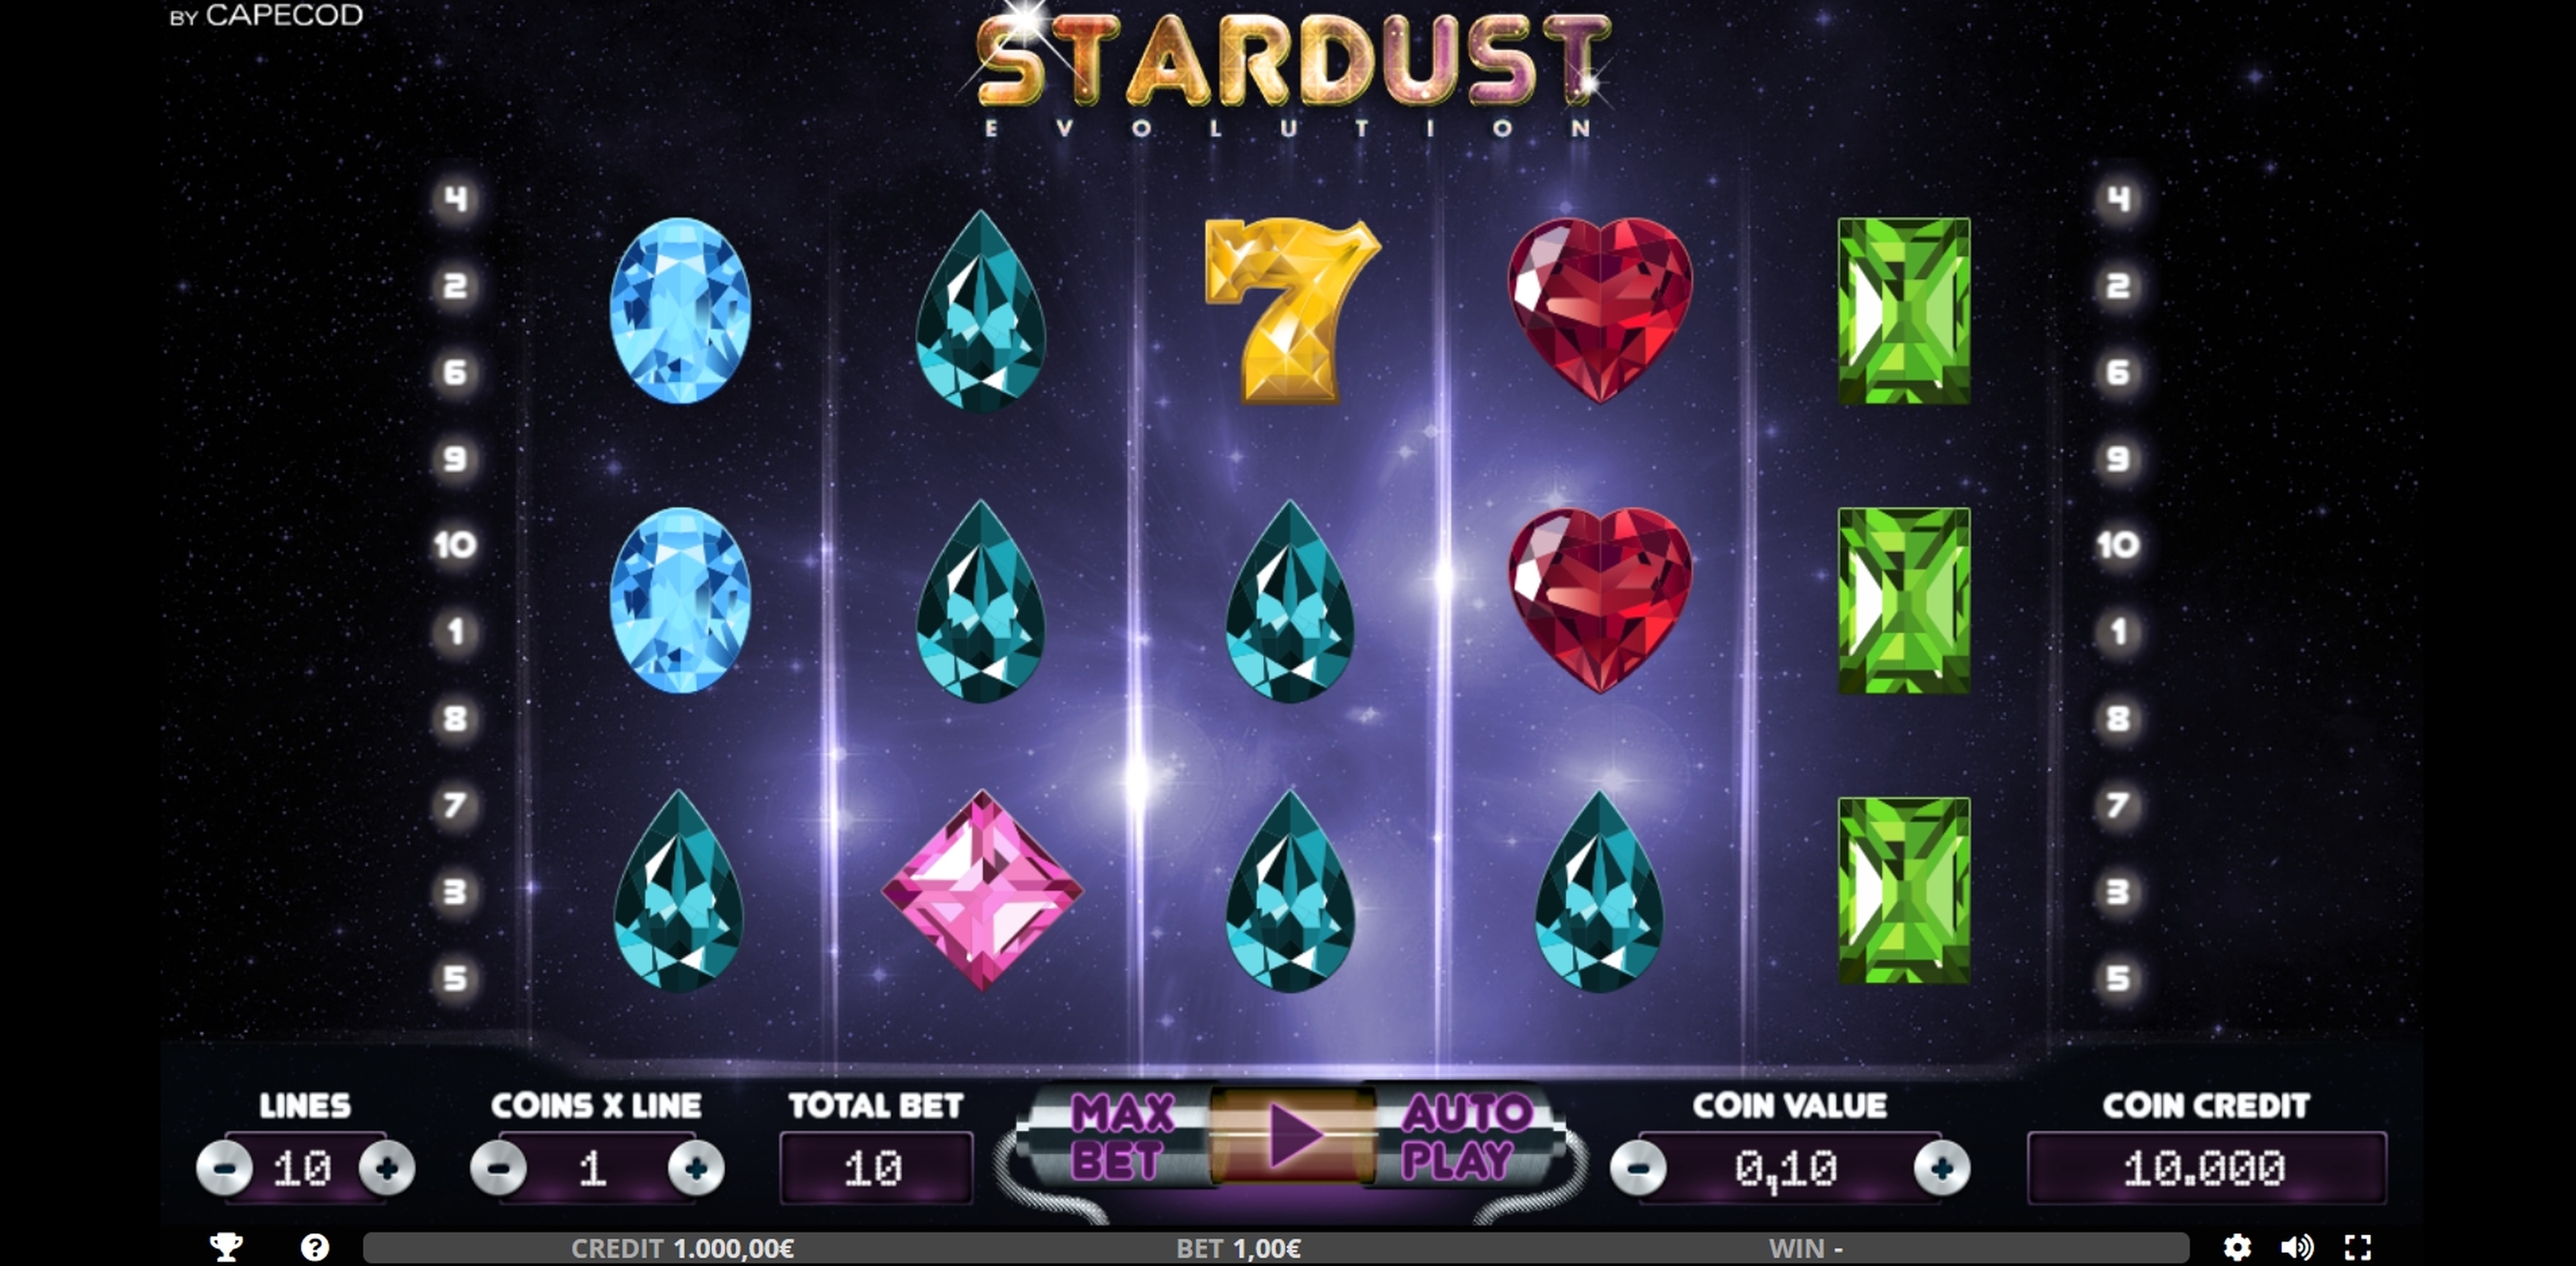 Reels in Stardust Evolution Slot Game by Capecod Gaming